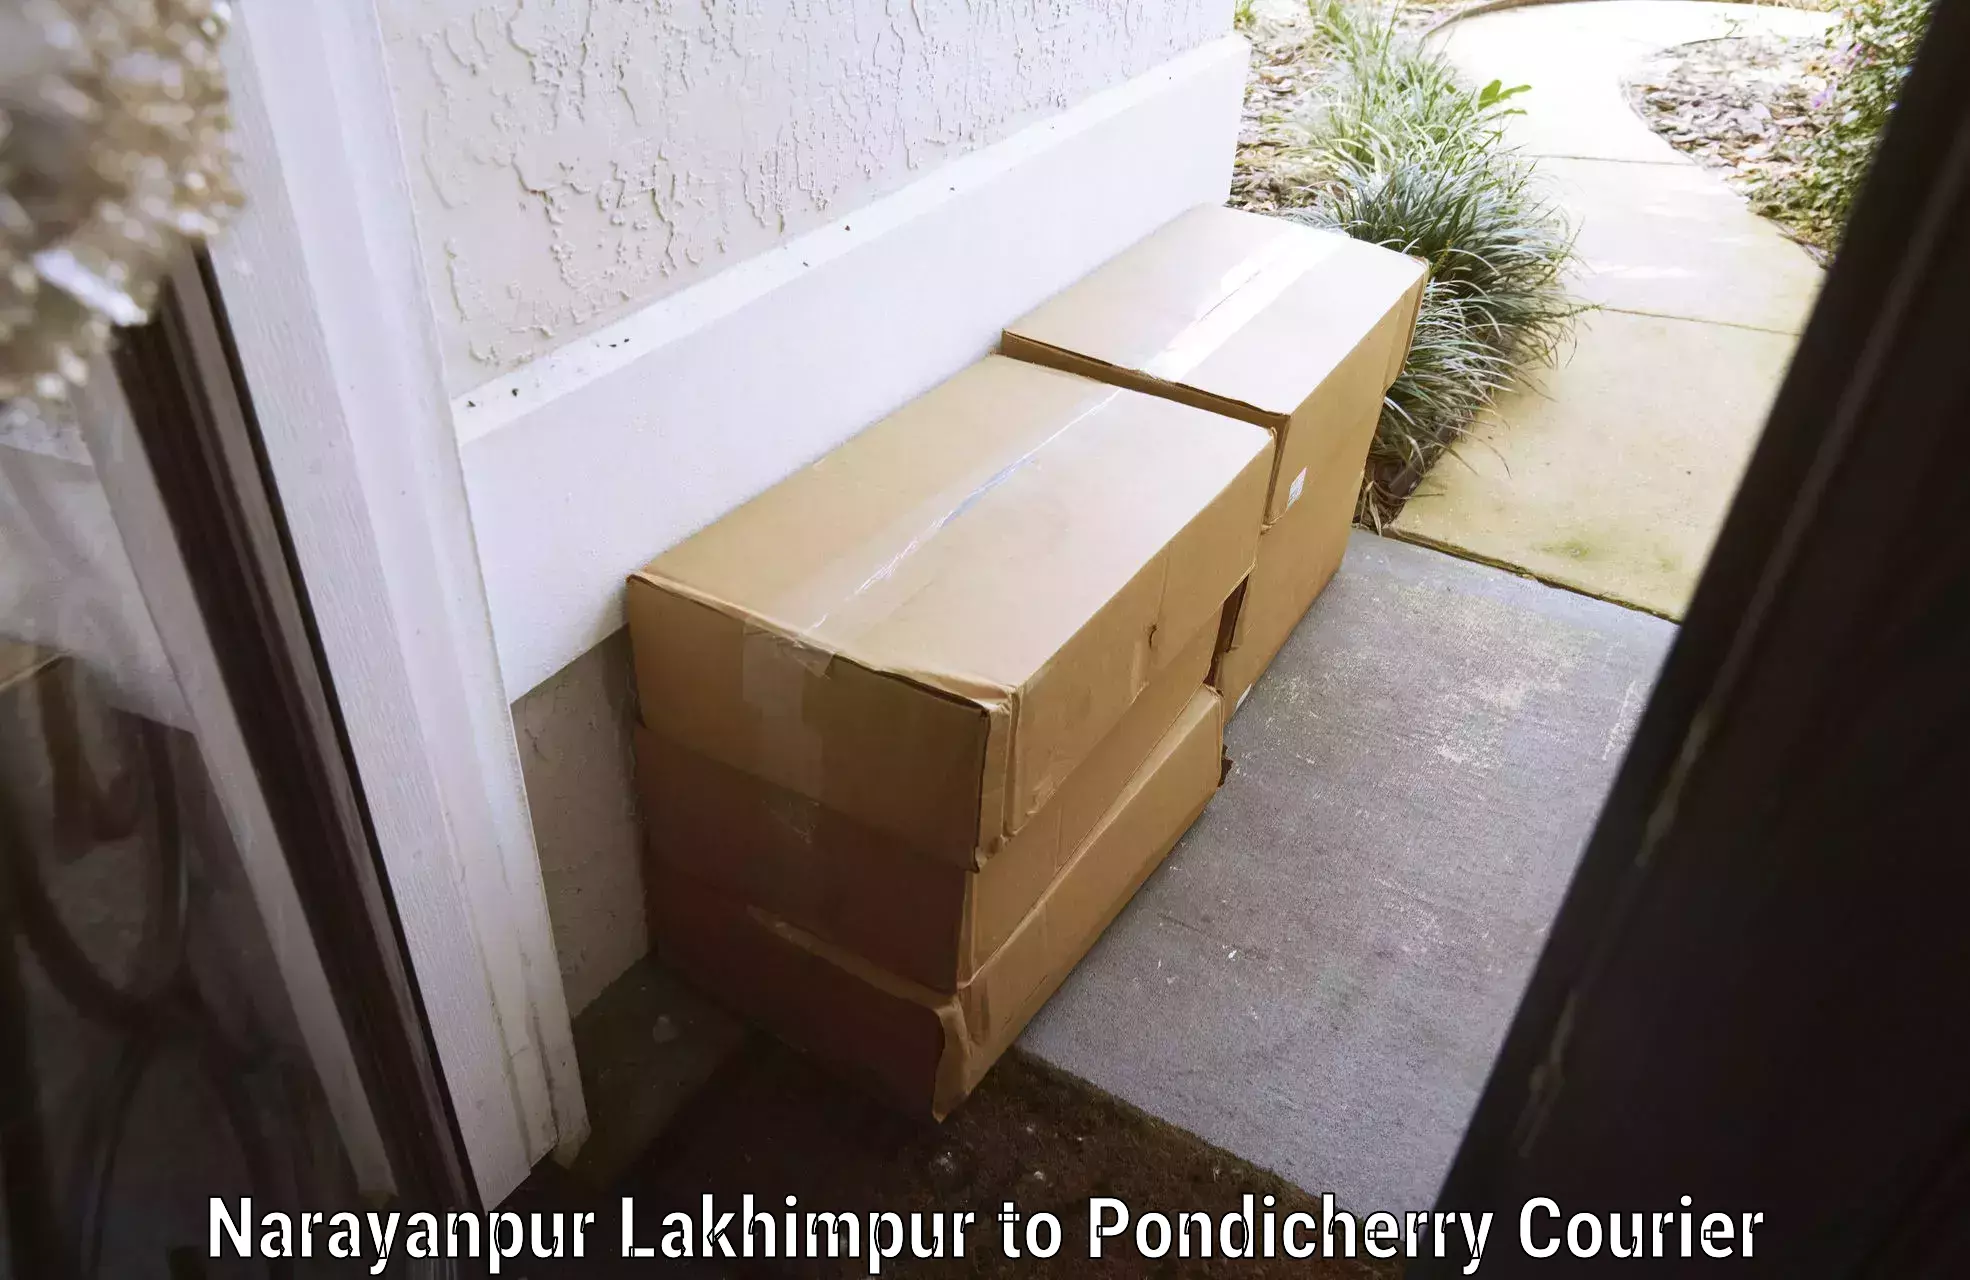 Luggage delivery providers Narayanpur Lakhimpur to Metttupalayam